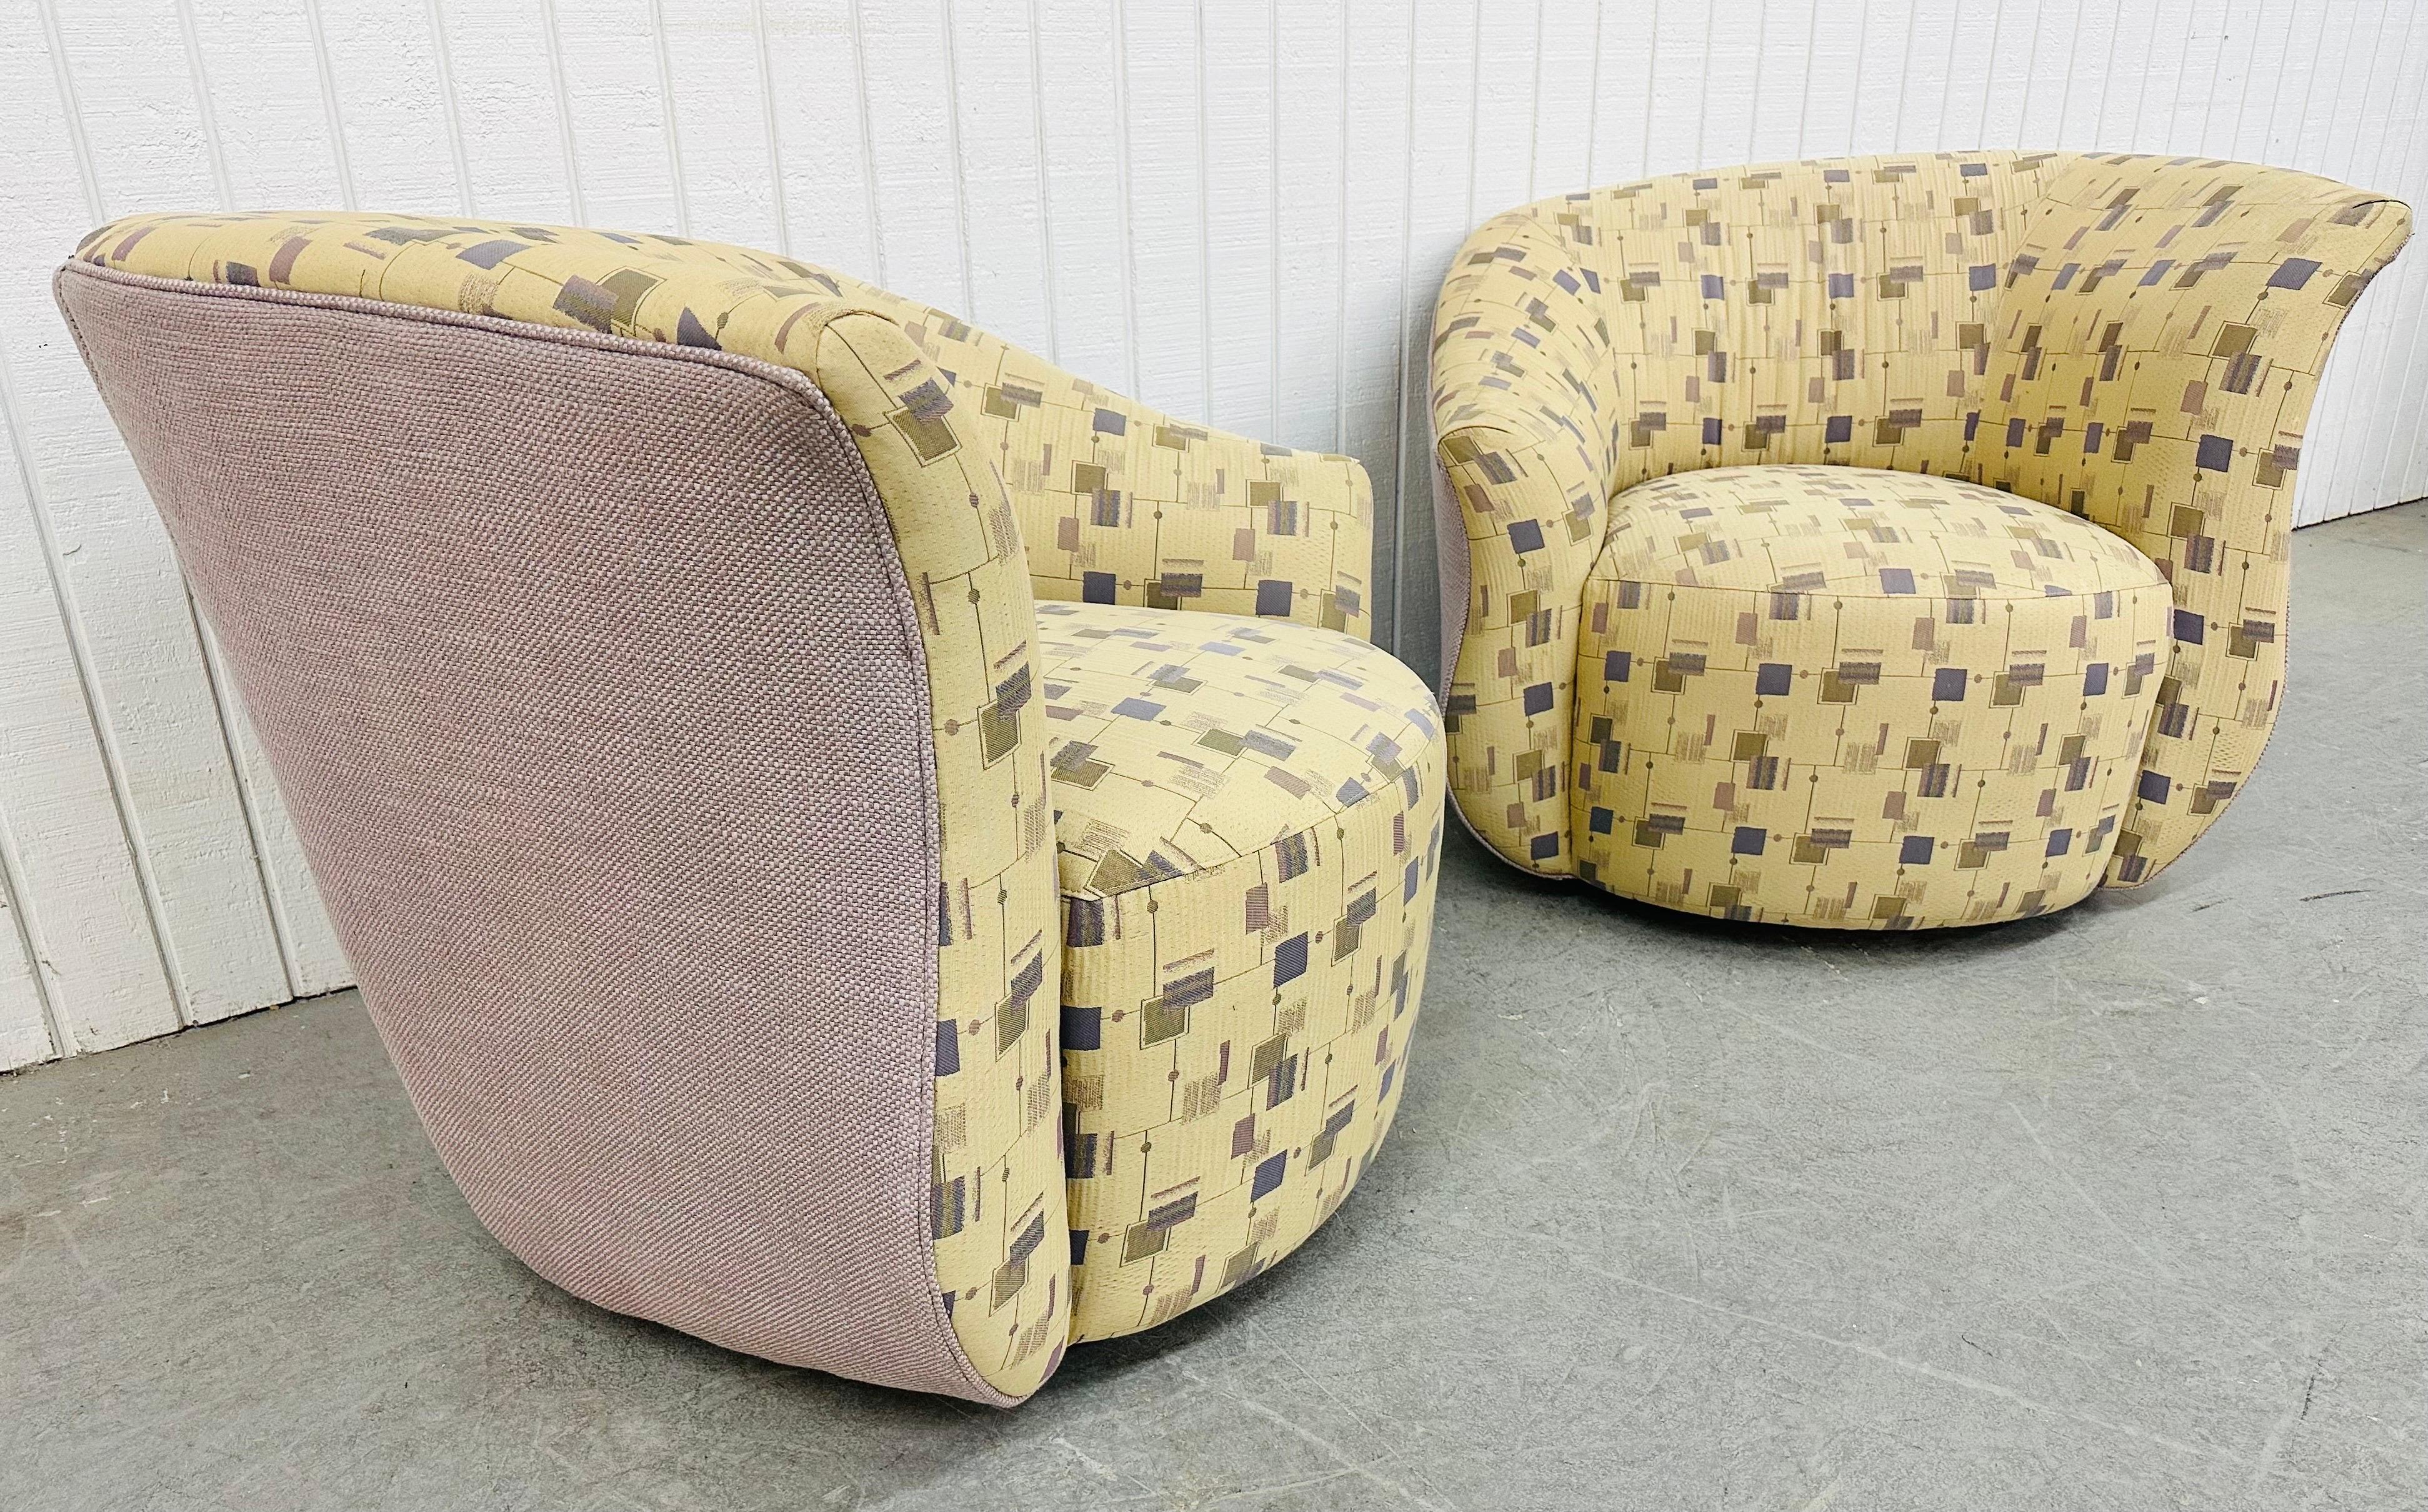 This listing is for a pair of Post Modern Oversized Swivel Chairs. Featuring a curved postmodern design, original geometrical upholstery, and the ability to swivel. This is an exceptional combination of quality and design in the style of Weiman.